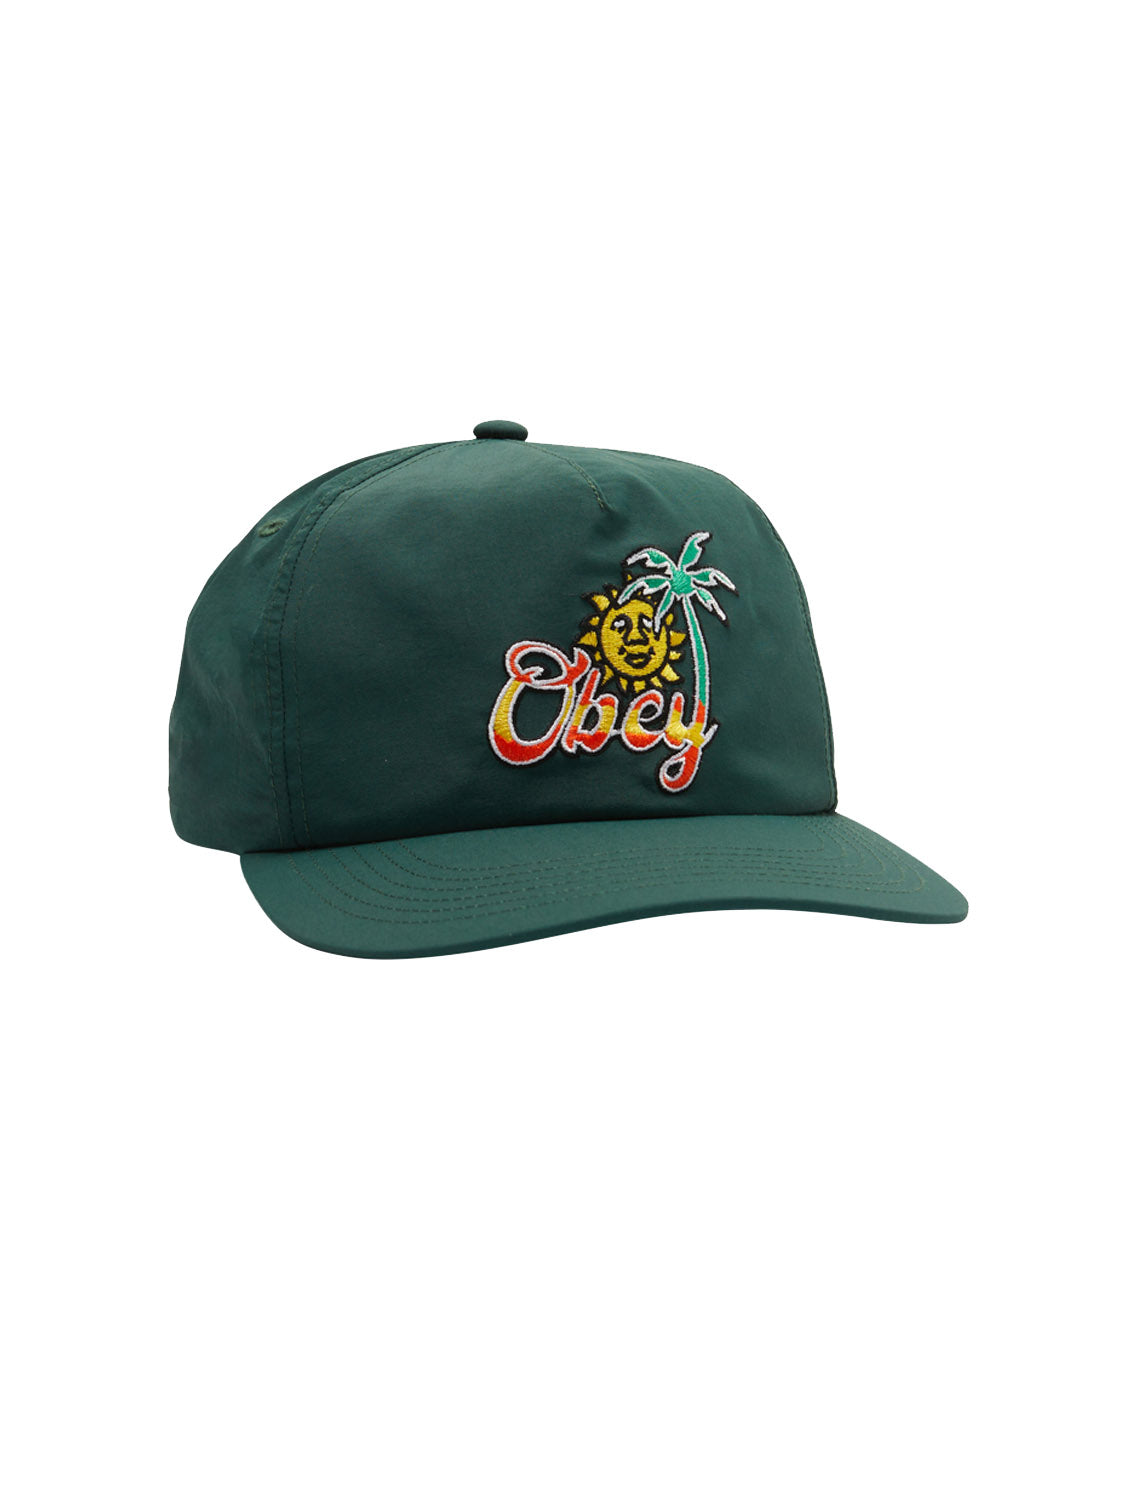 Obey Tropical 6 Panel Snapback Hat